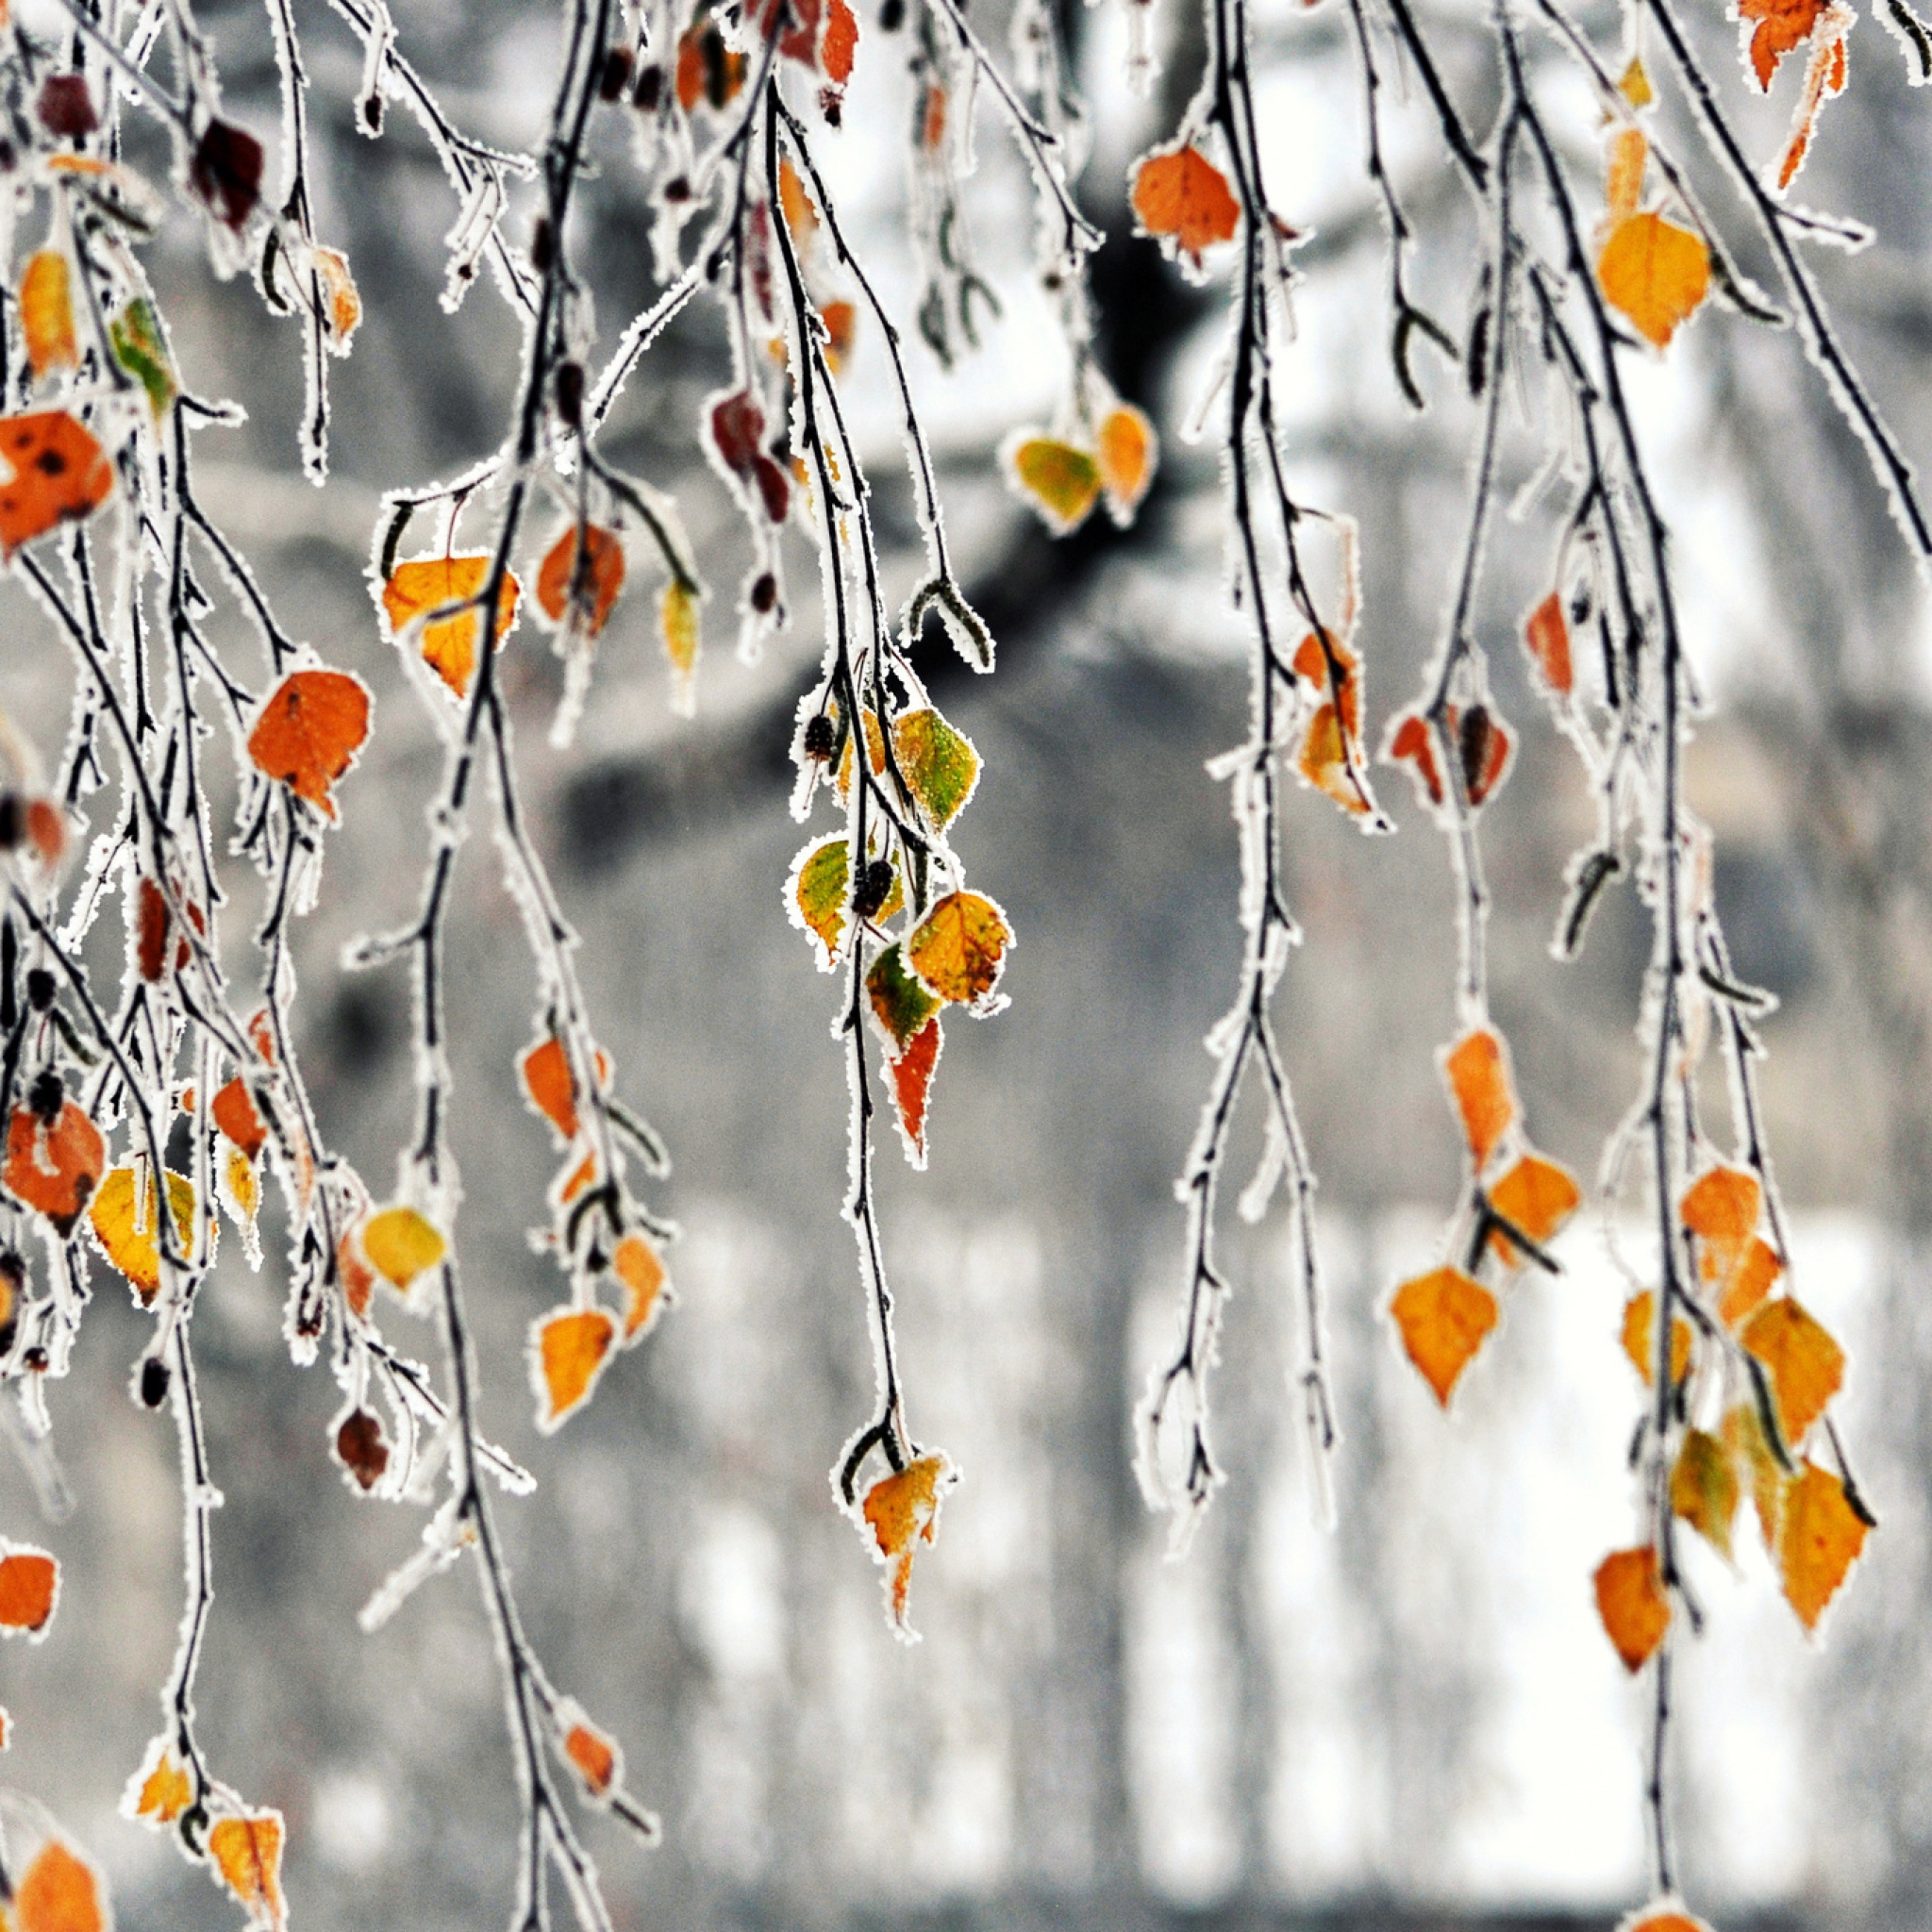 Autumn leaves in frost screenshot #1 2048x2048